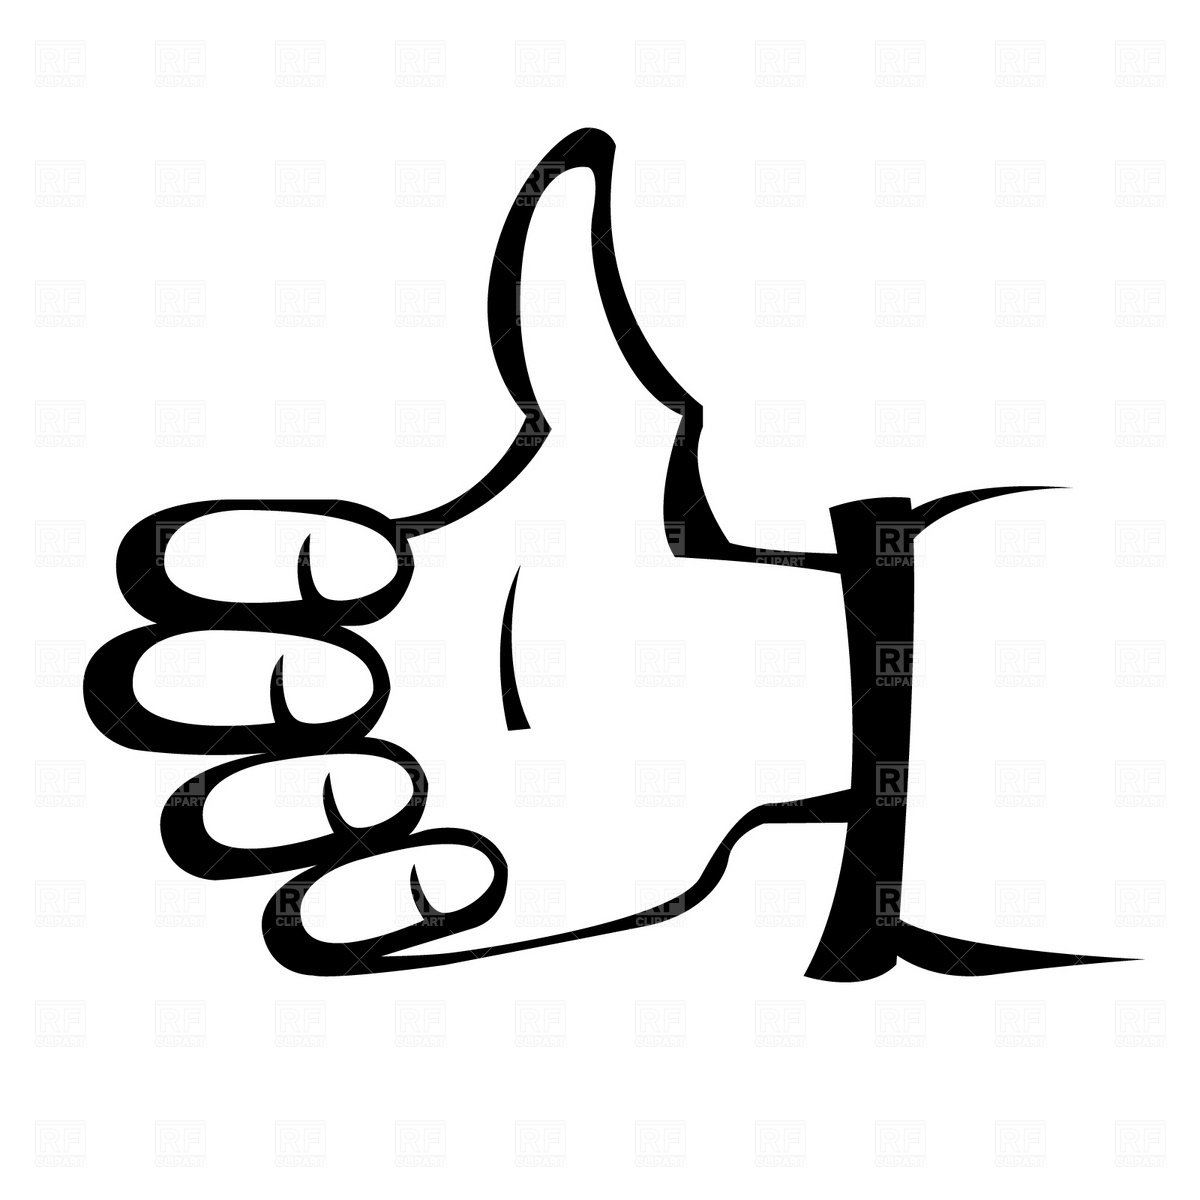 Thumb Up Image - ClipArt Best